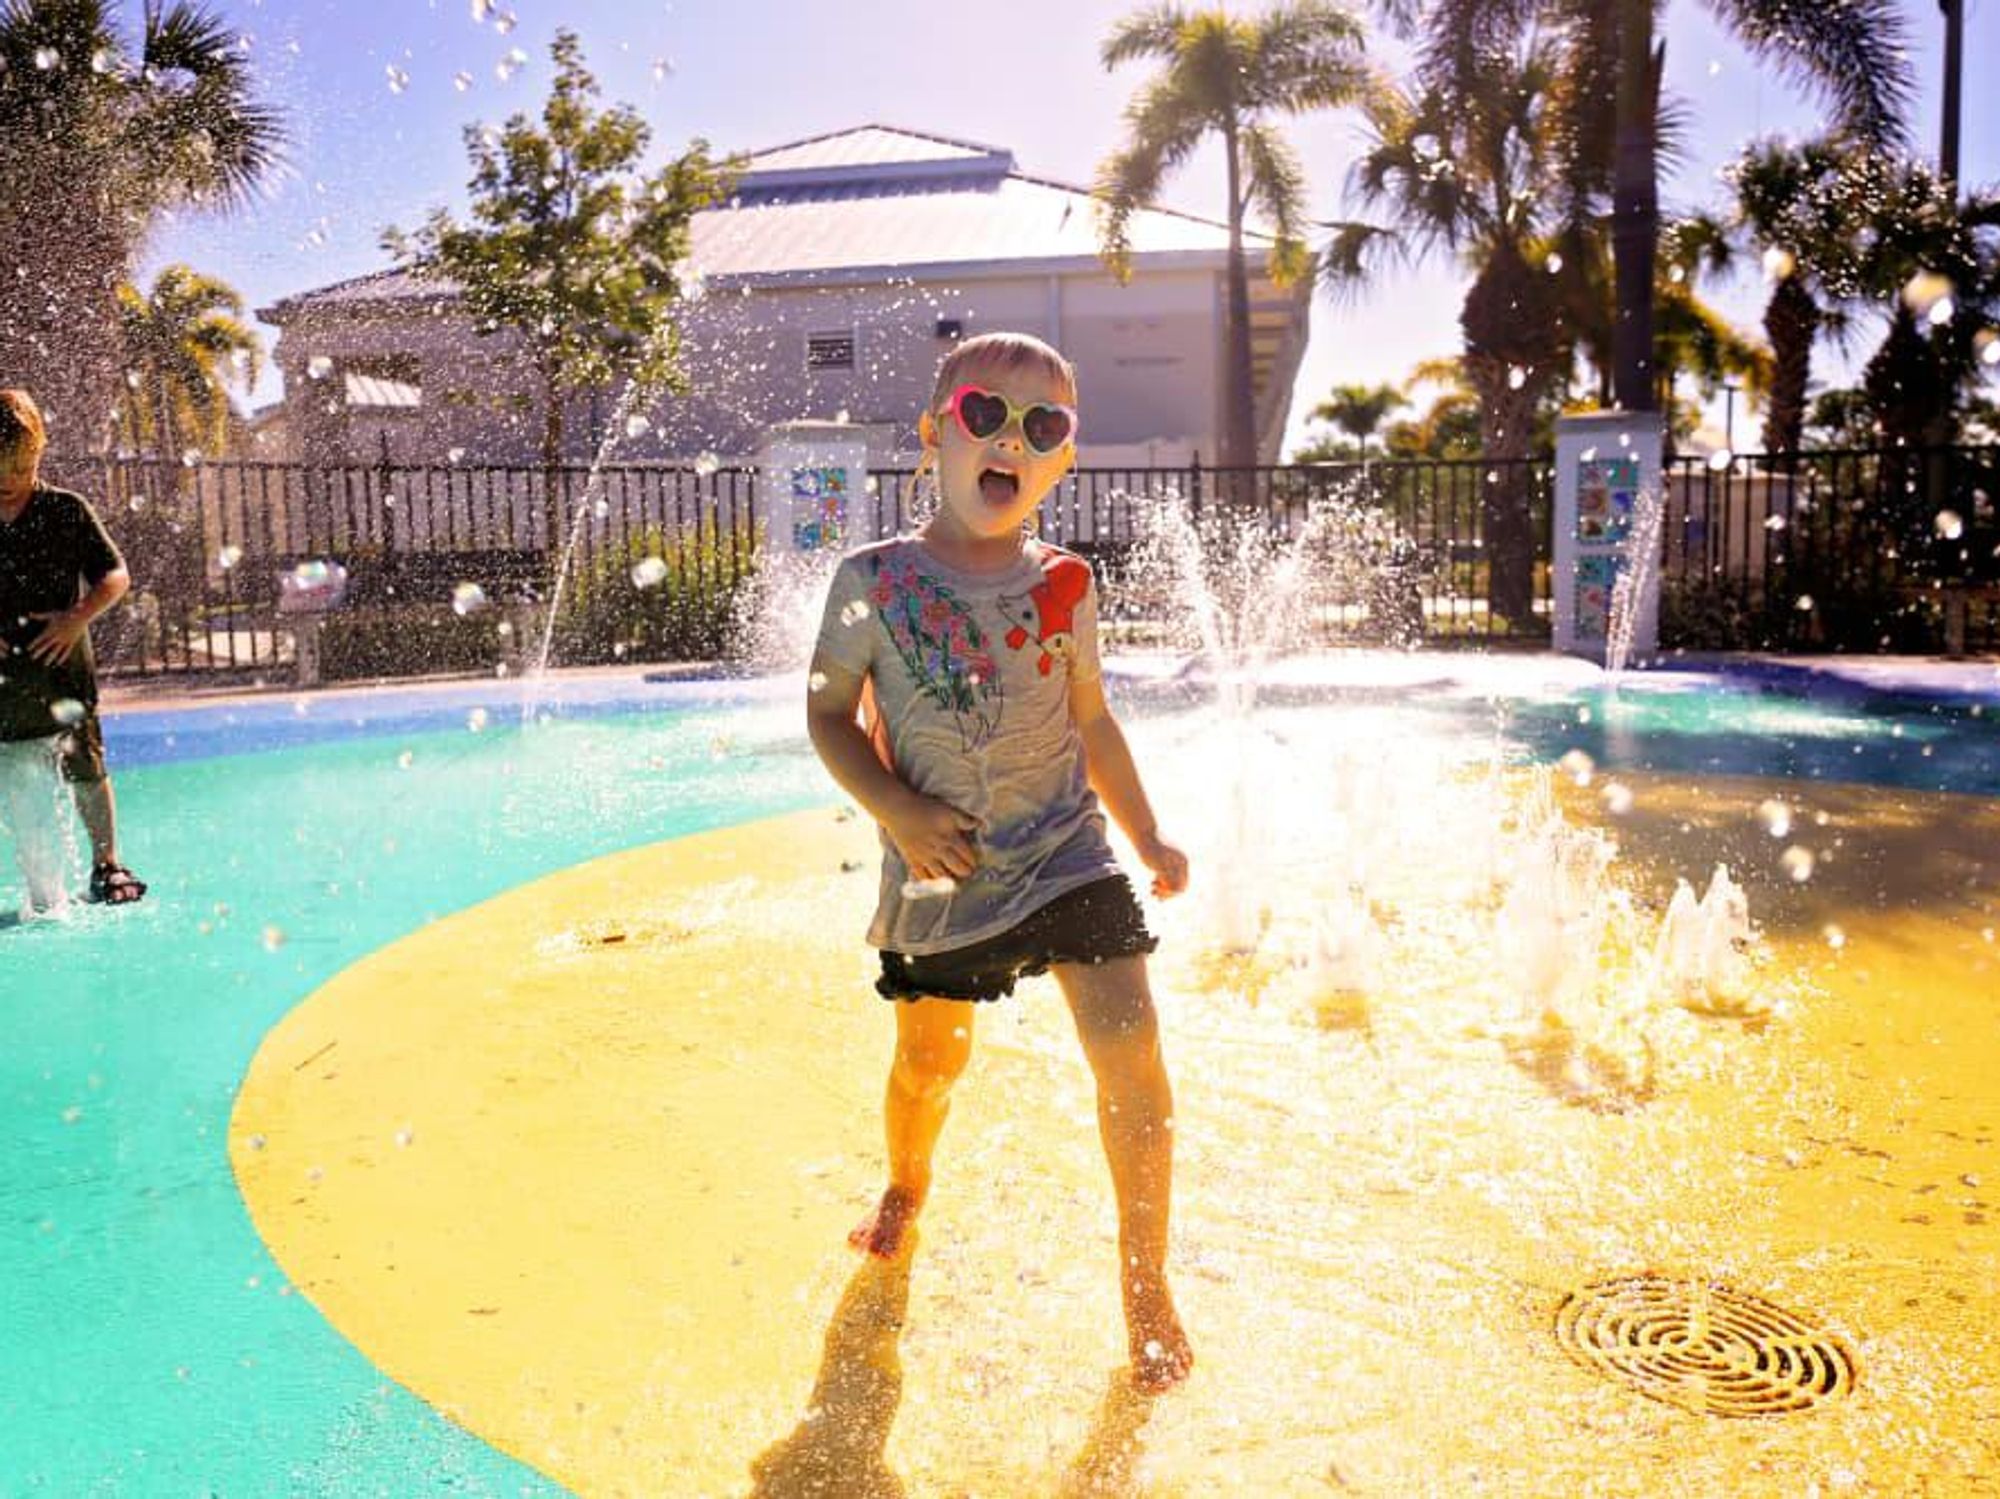 A child in wet clothes and sunglasses stands on a splash pad in the sun.